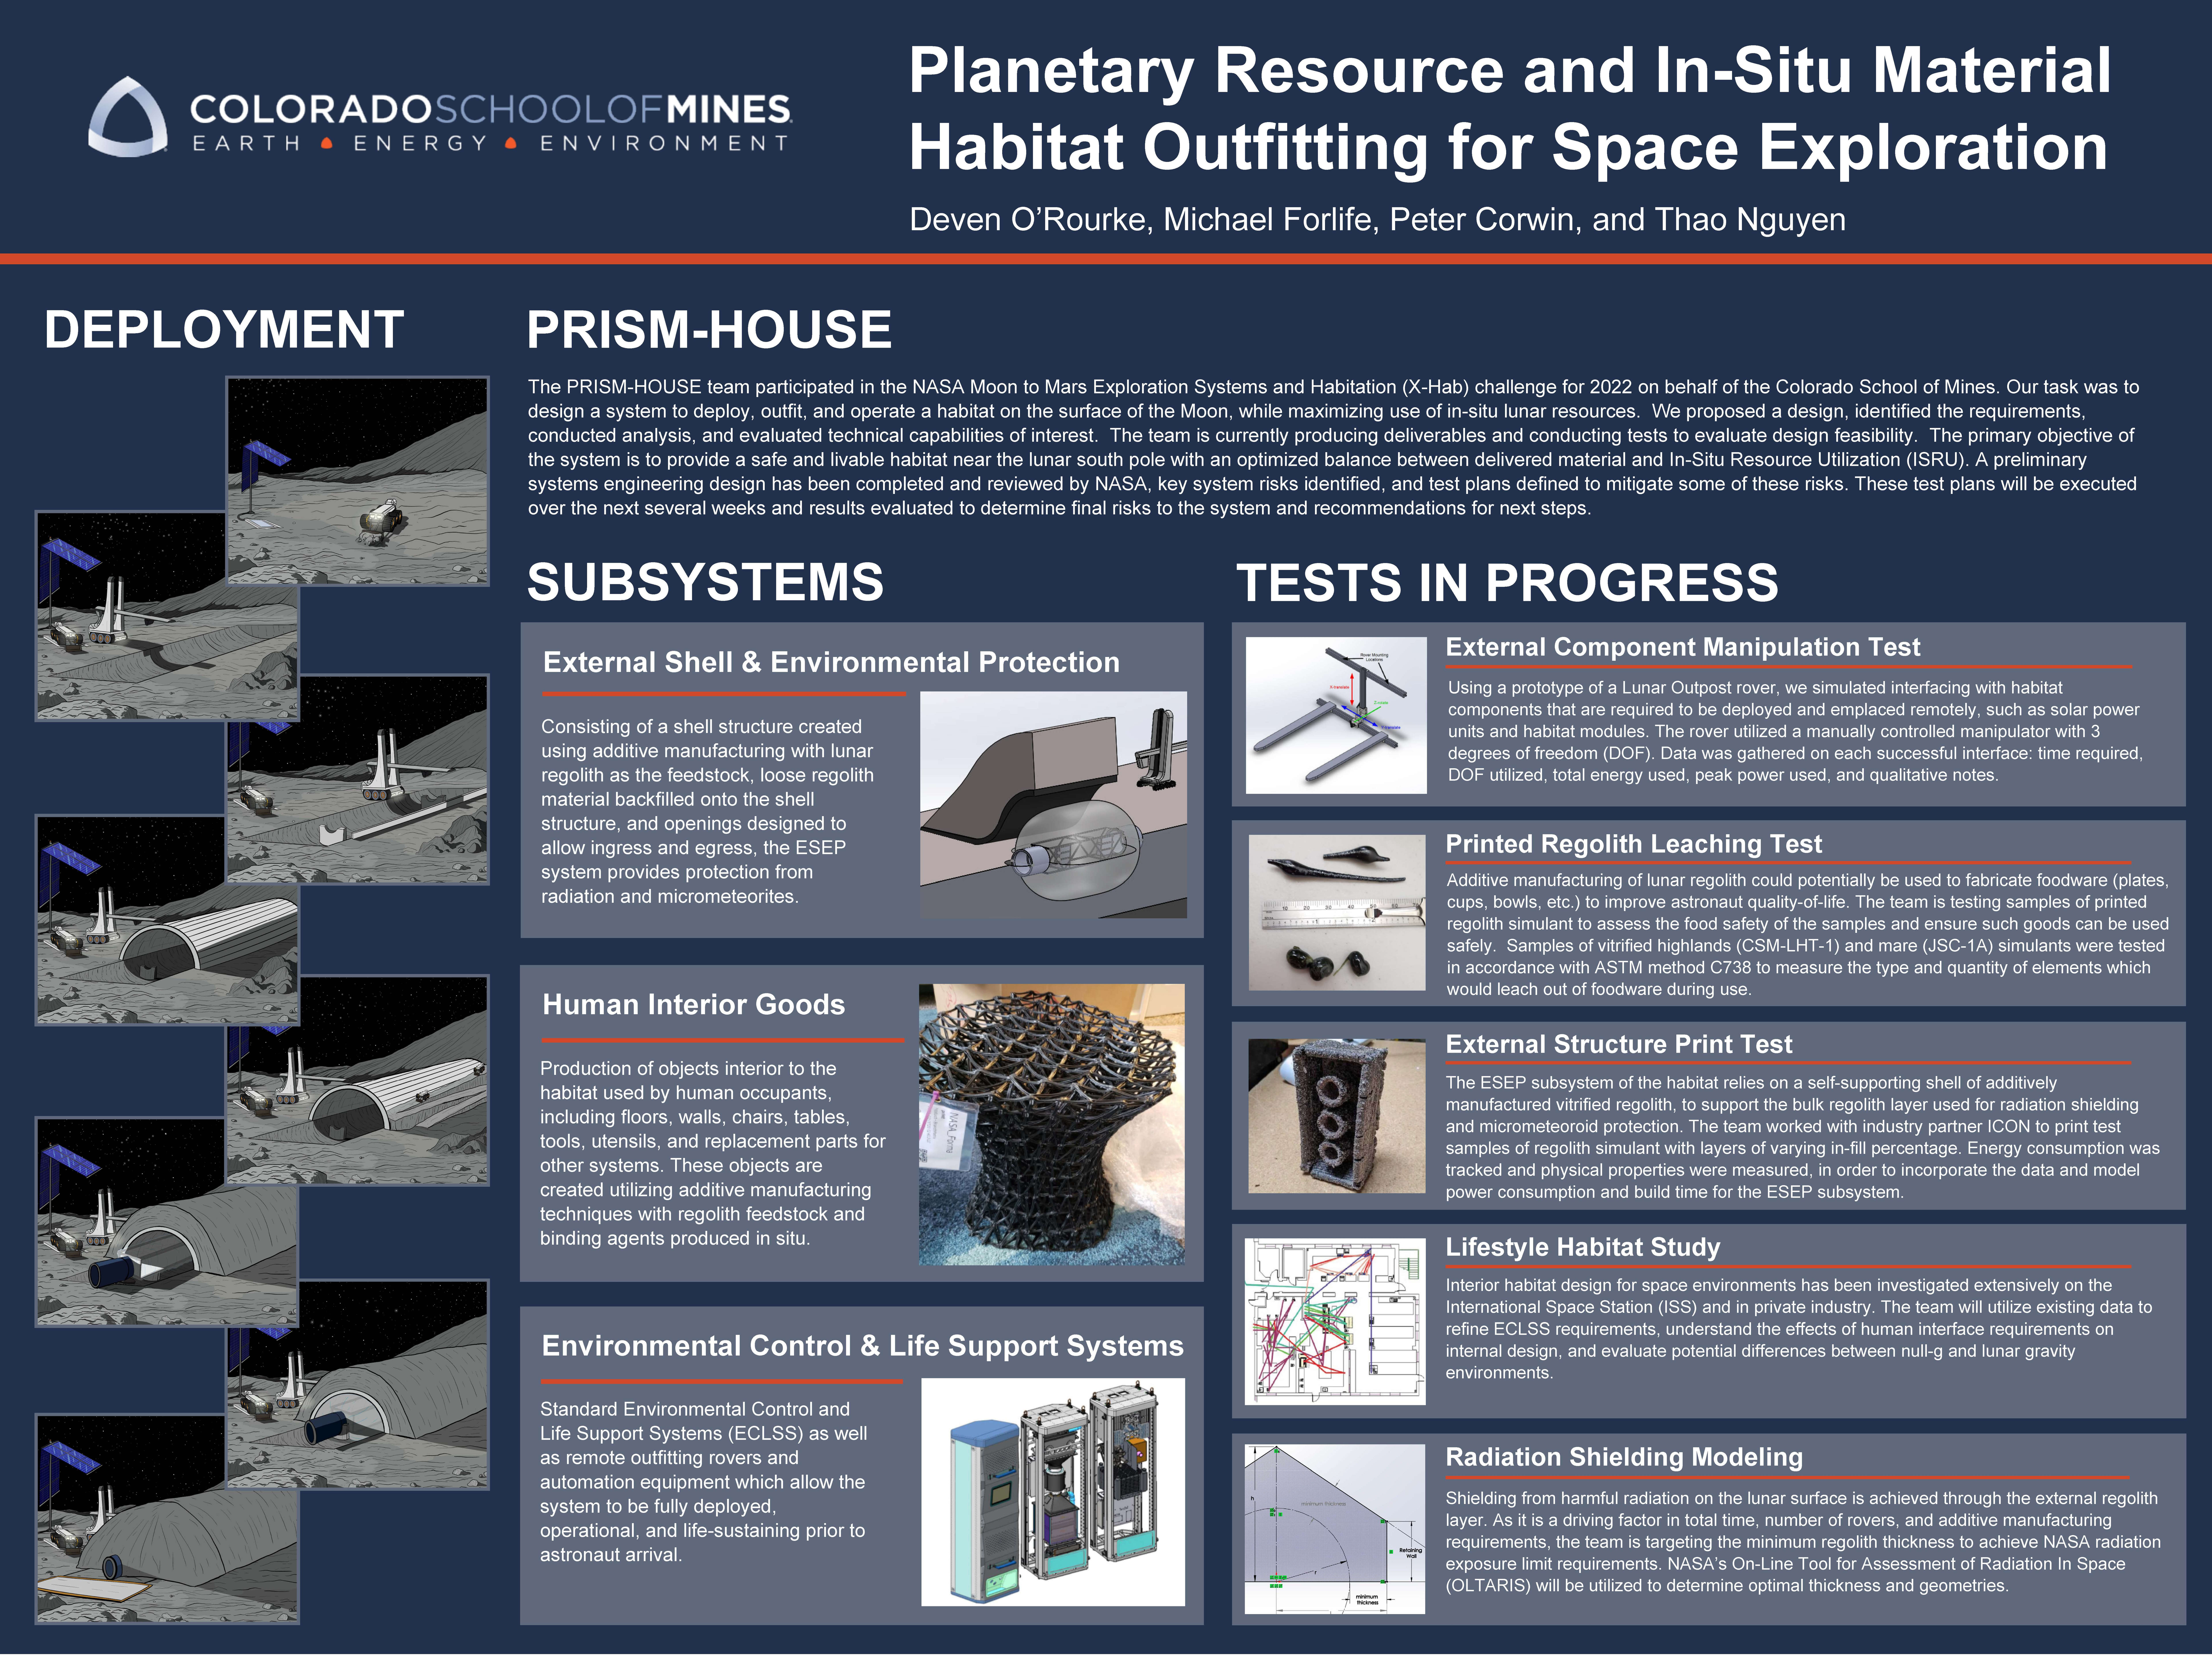 Planetary Resource and In-Situ Material Habitat Outfitting for Space Exploration (PRISM-HOUSE)